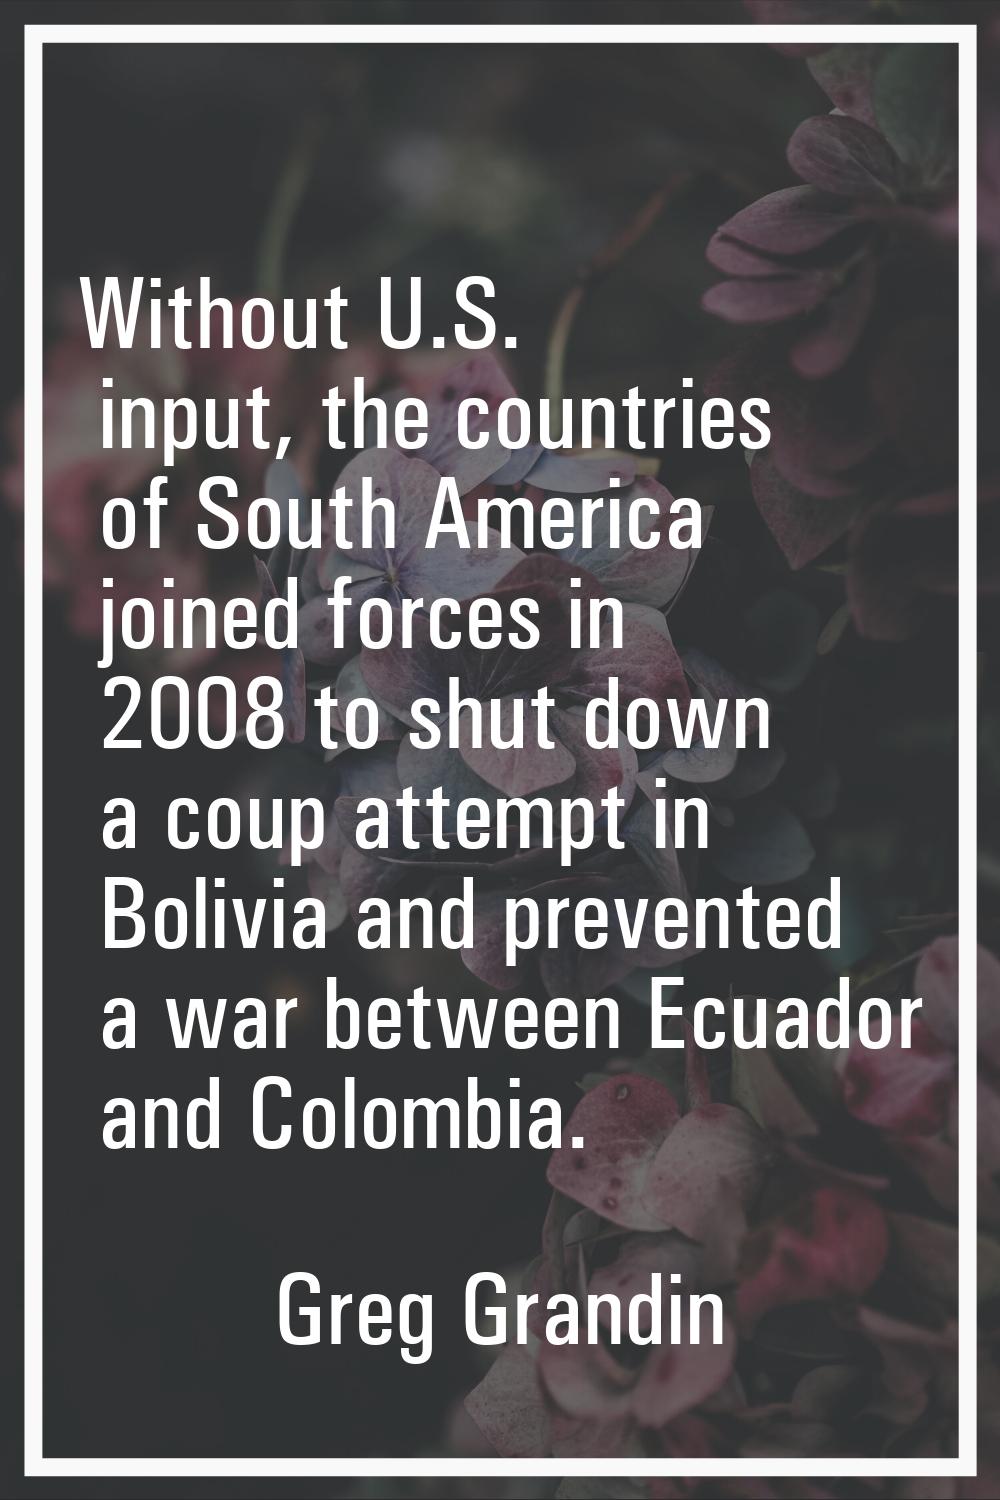 Without U.S. input, the countries of South America joined forces in 2008 to shut down a coup attemp